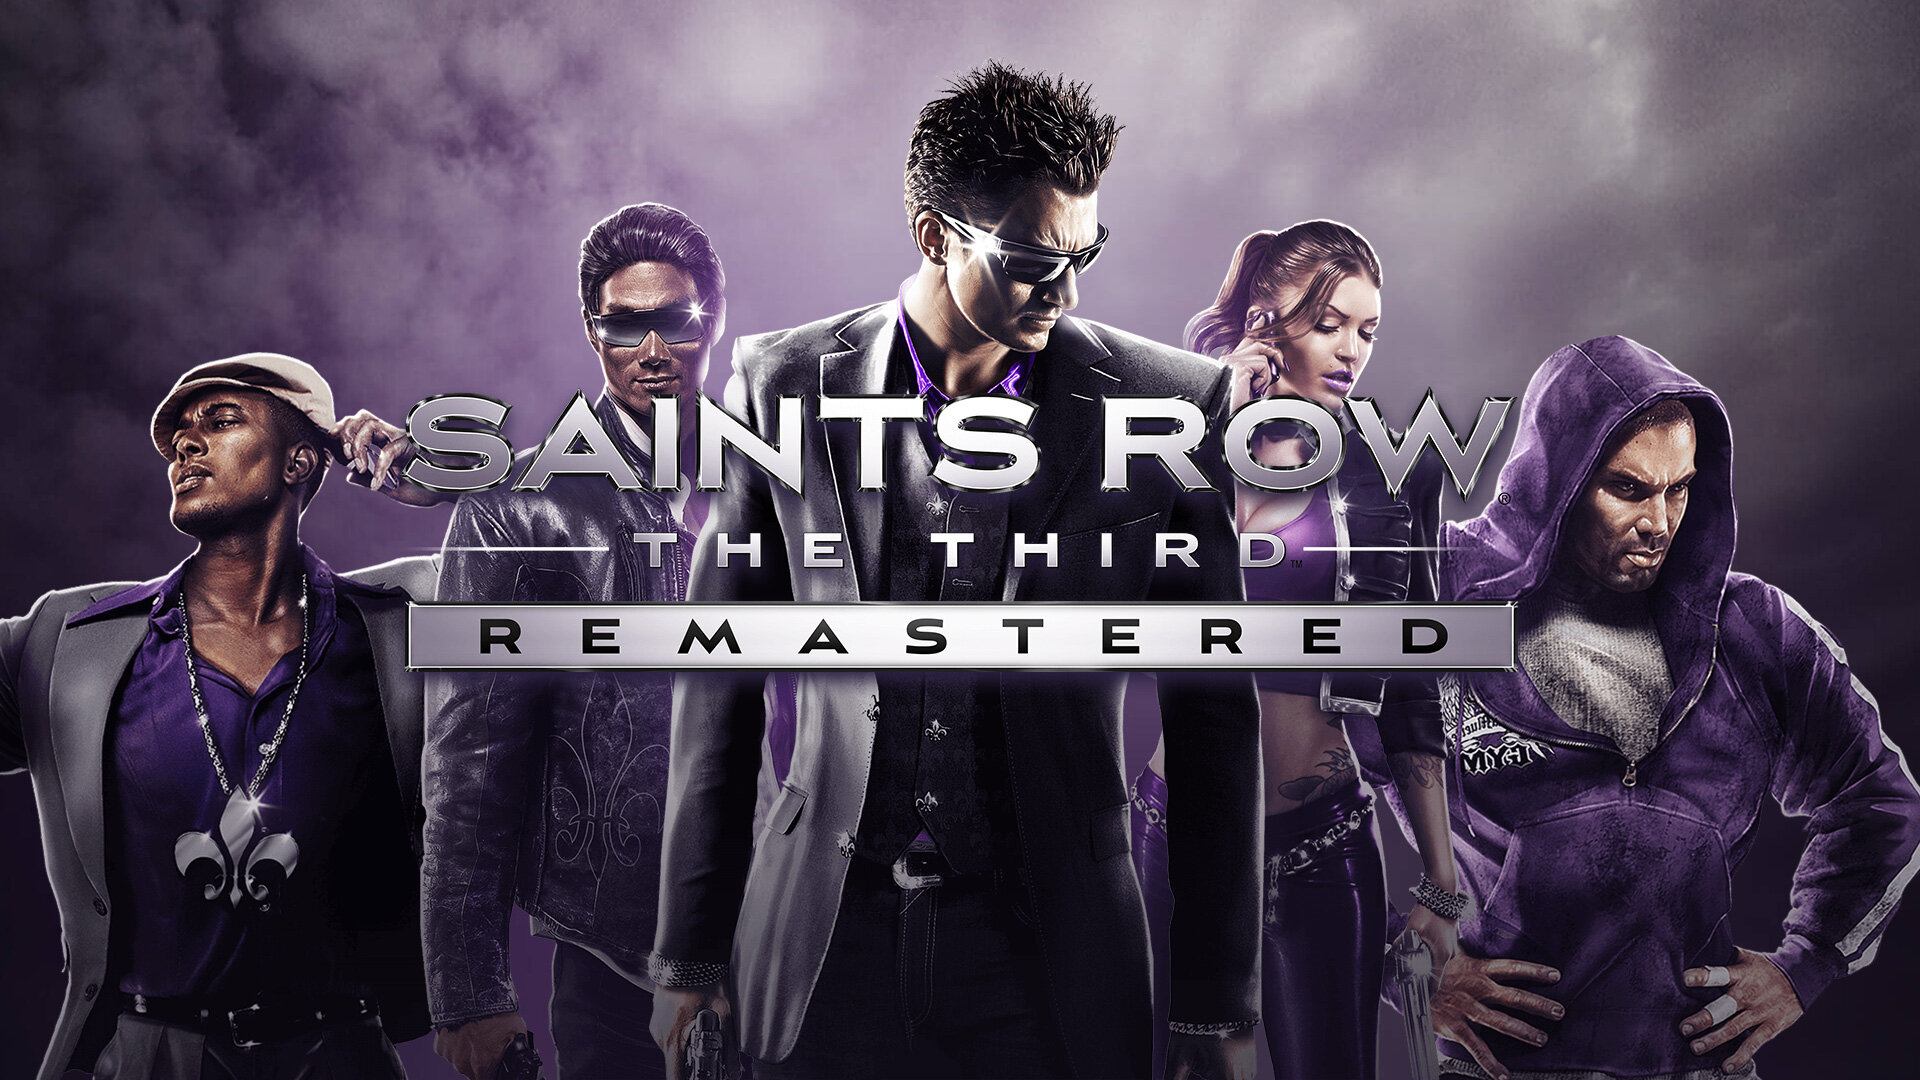 Saints Row: The Third Remastered announced for PS4, Xbox One, and